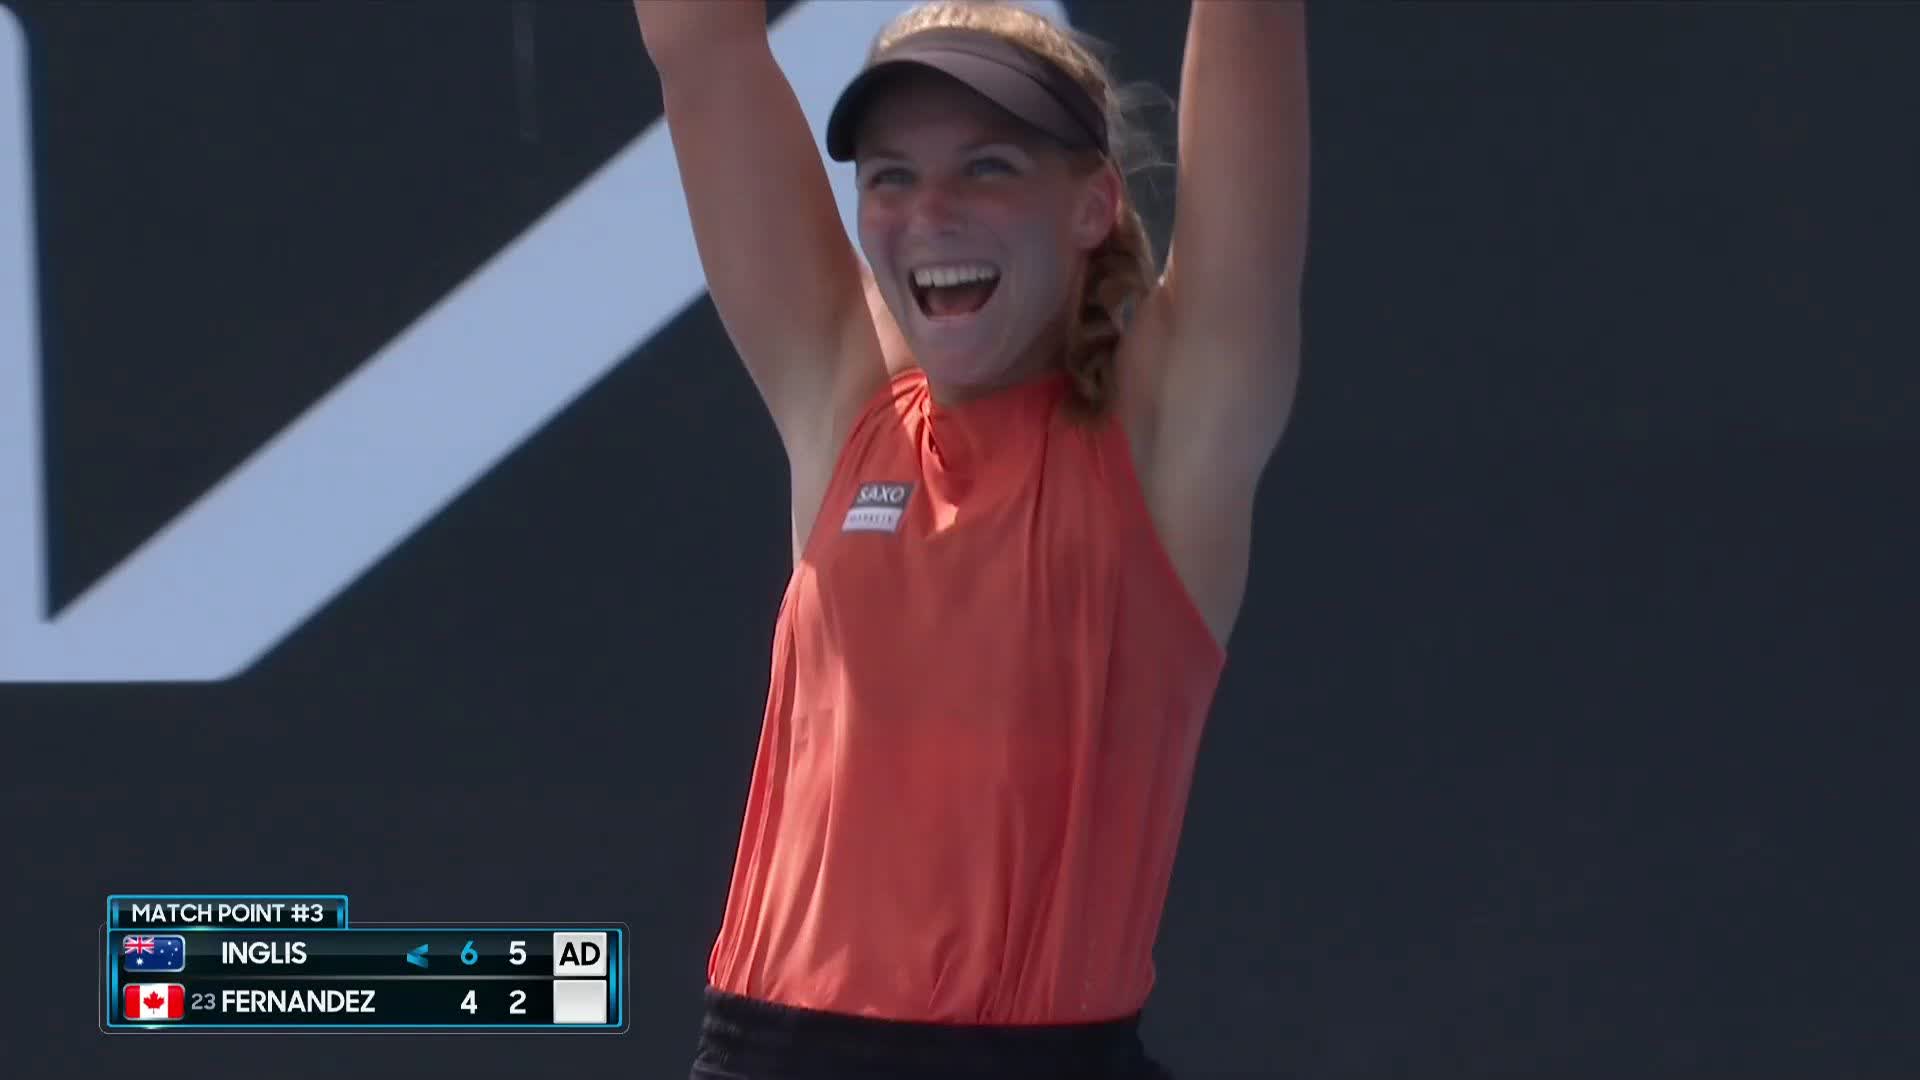 Maddison Inglis pulls off an impressive first round win at 2022 Australian Open